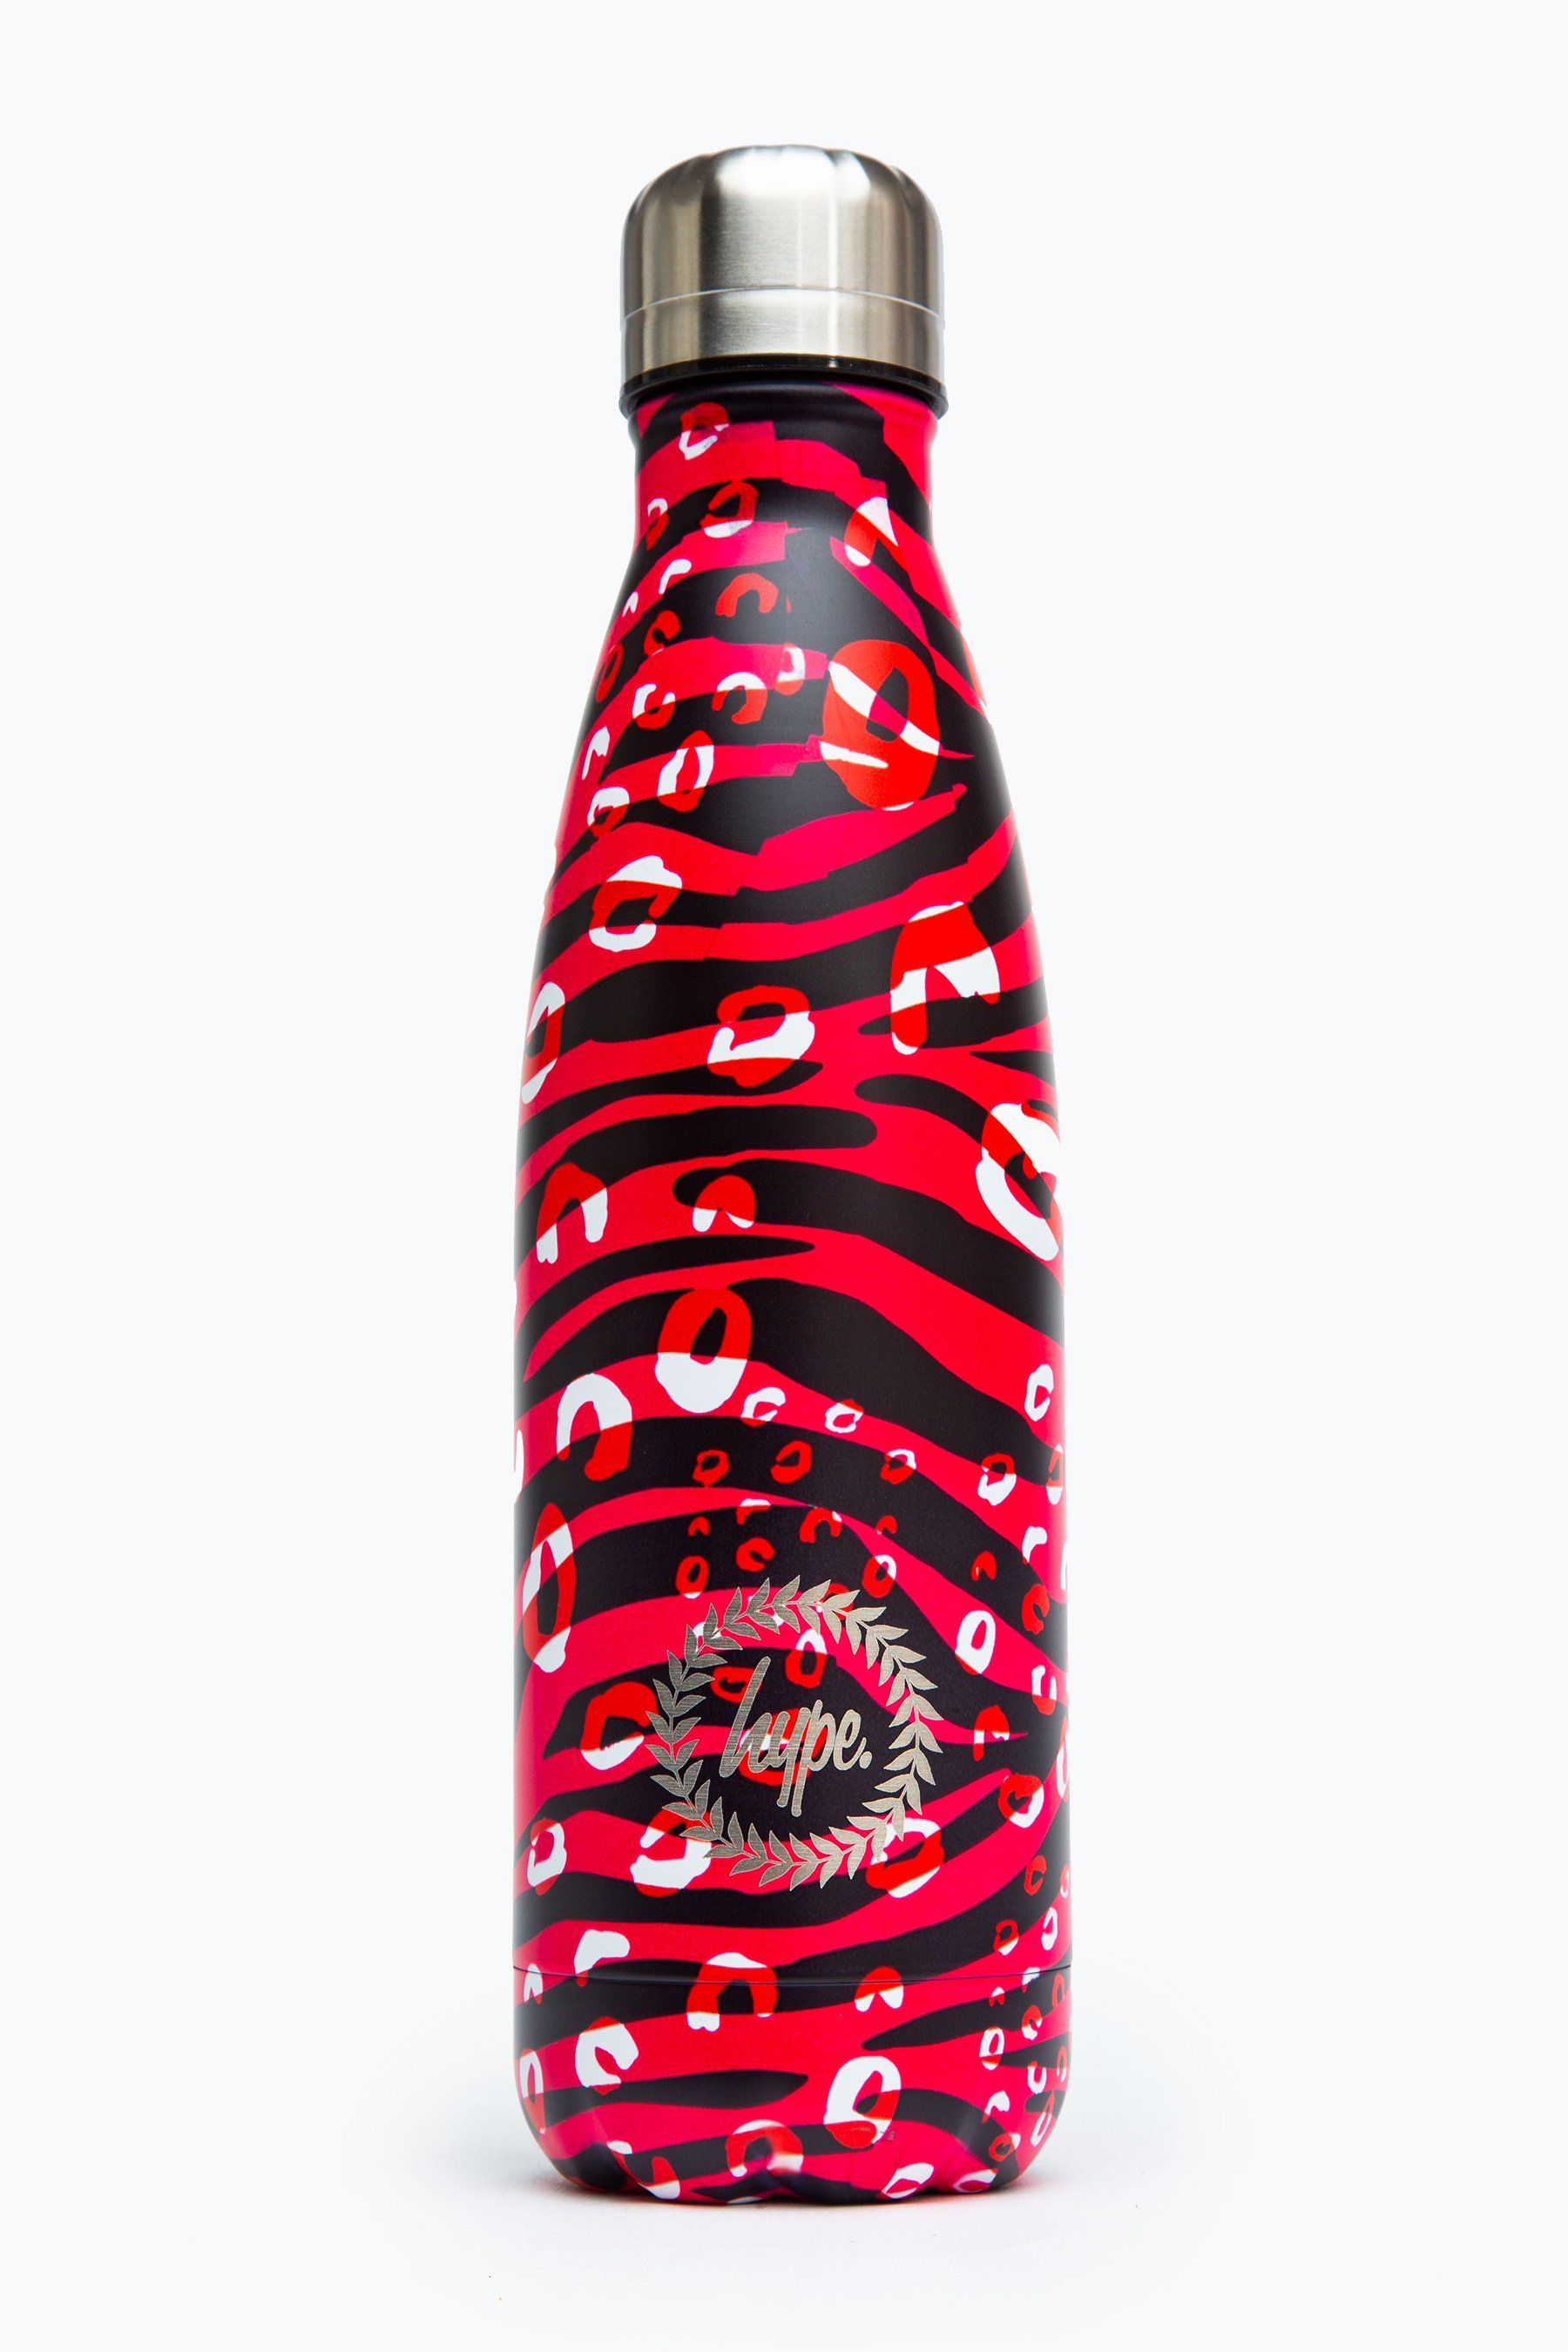 Keeping you hydrated, in style. Meet the HYPE. pink & black zebra metal reusable bottle, perfect for when you're on the go. Designed in Aluminium to ensure your water stays ice-cold and for chillier days, keeping your oat milk latte warm for longer. Why not grab one of our lunch bags or backpacks with a bottle holder to complete the look, we suggest grabbing the matching set.